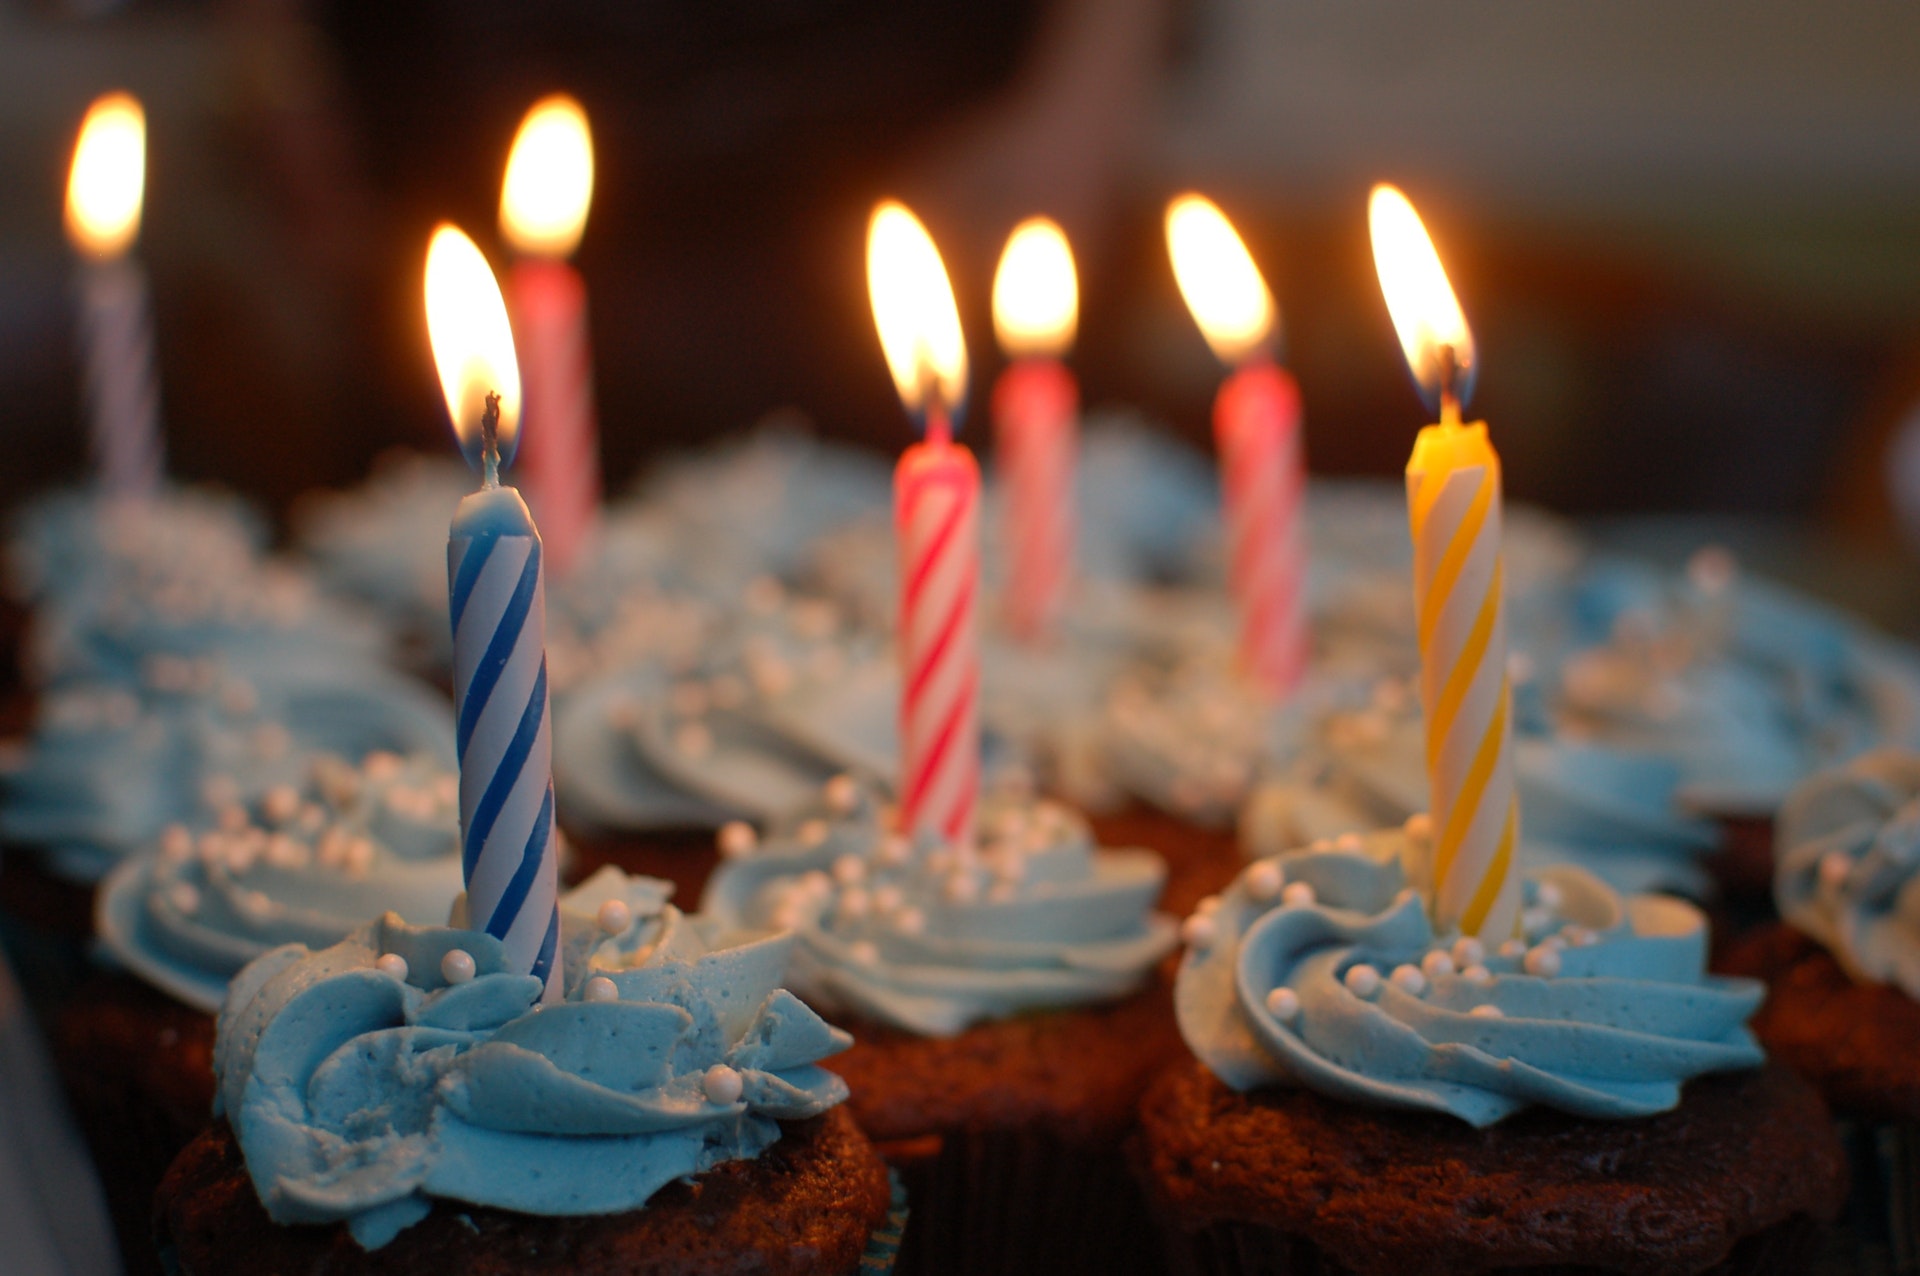 Lighted candles on cupcakes with blue frosting